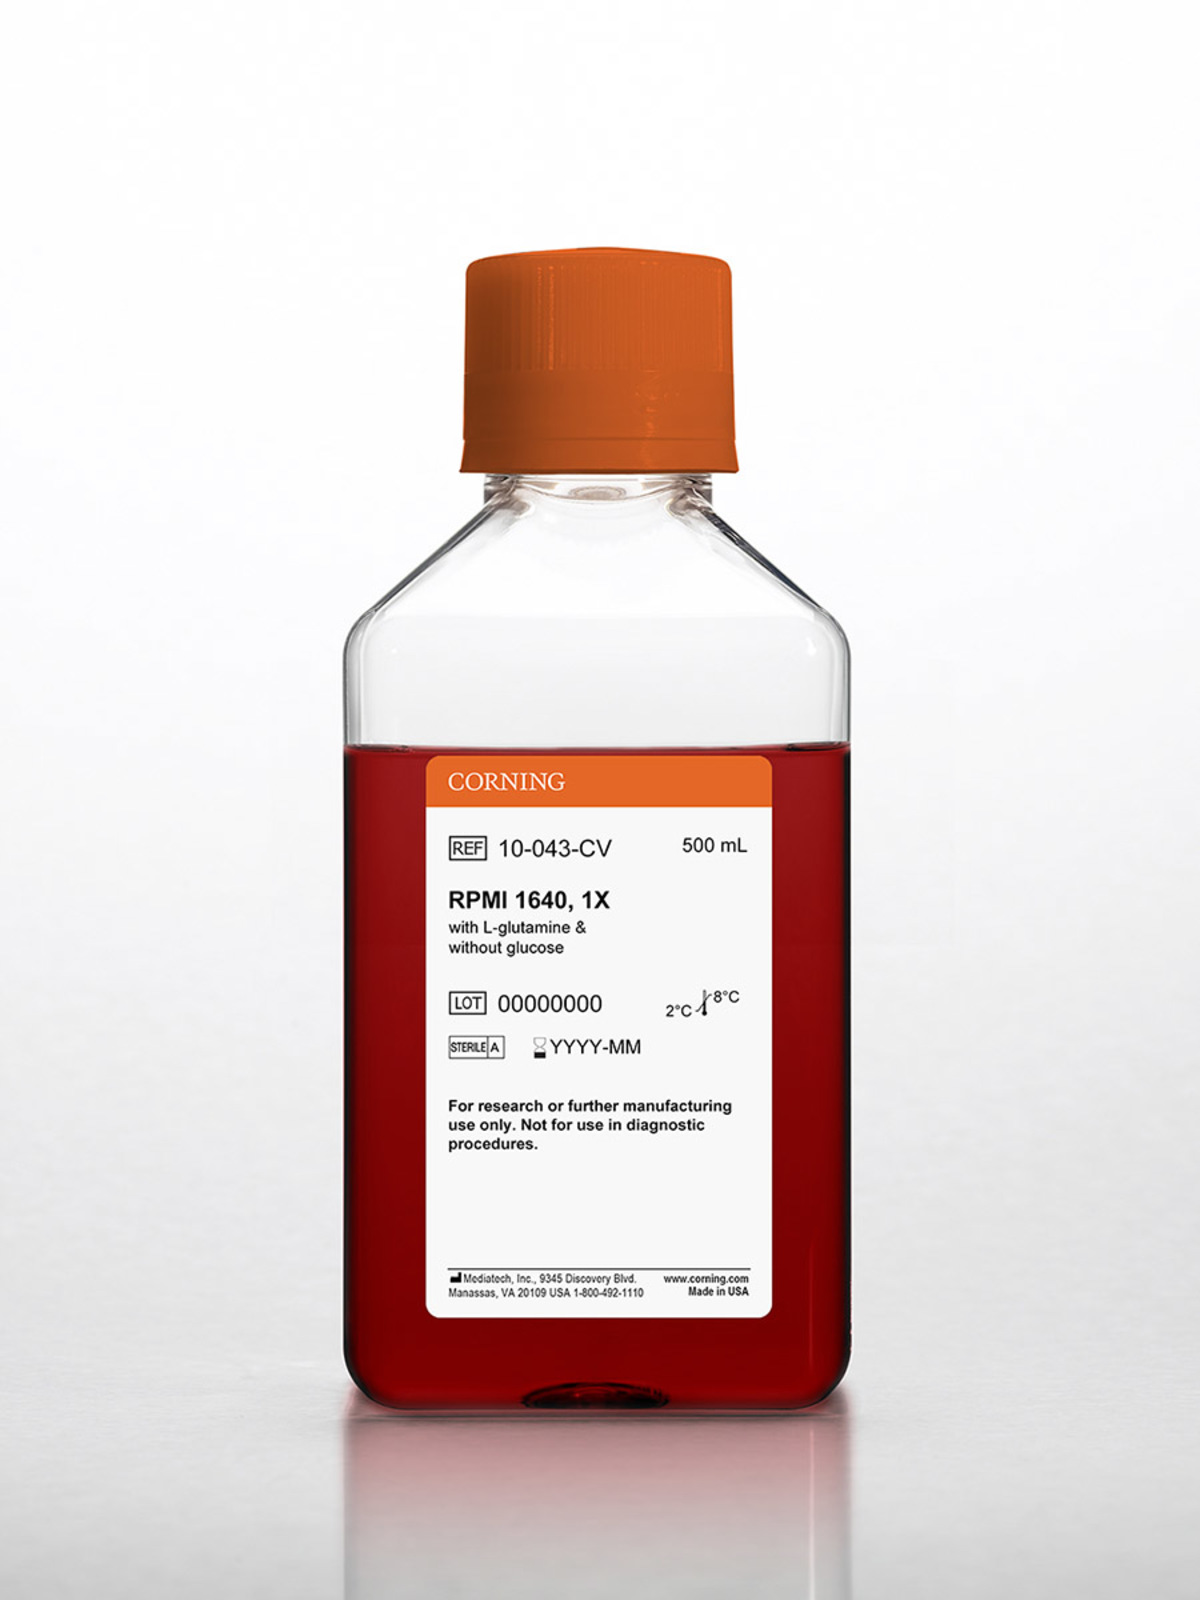 500 mL RPMI 1640 with L-glutamine, without glucose